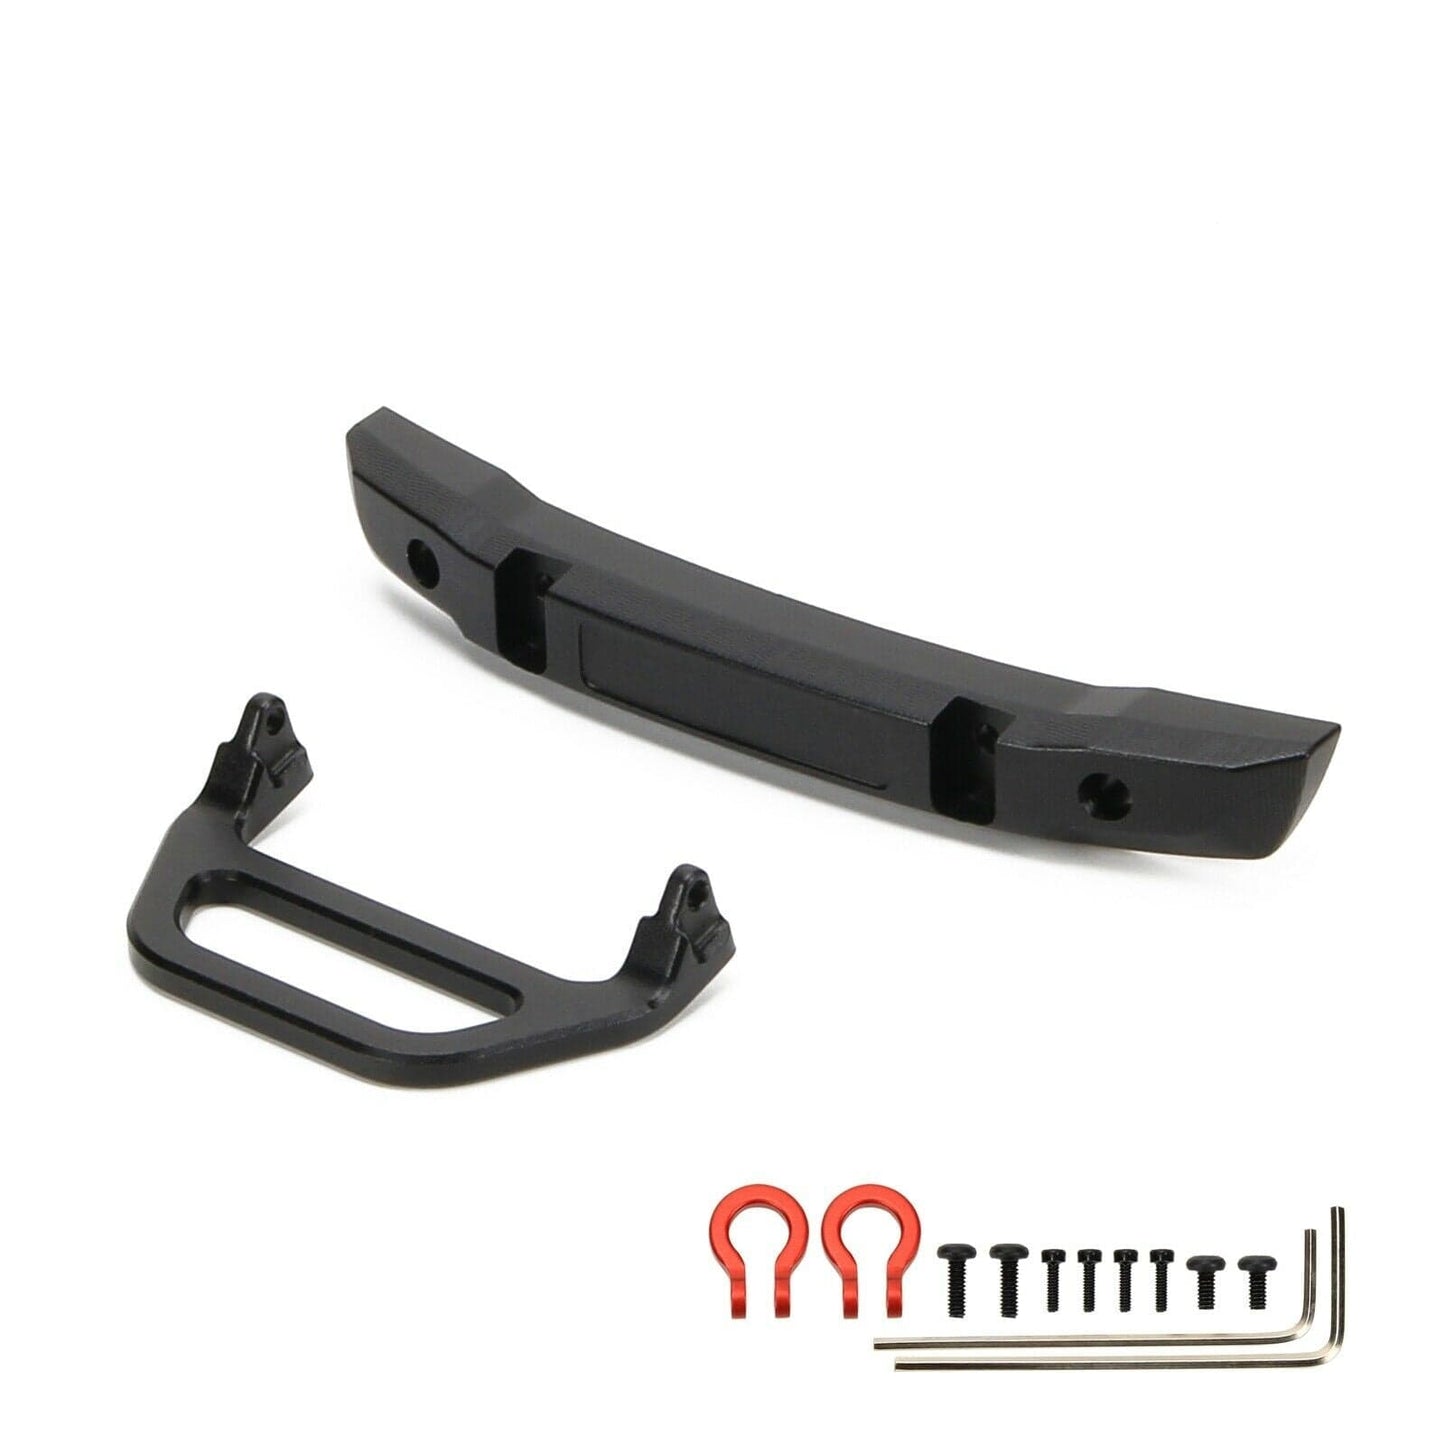 RCAWD AXIAL SCX24 RCAWD Axial SCX24 front bumper alloy new design upgrade parts SCX2500